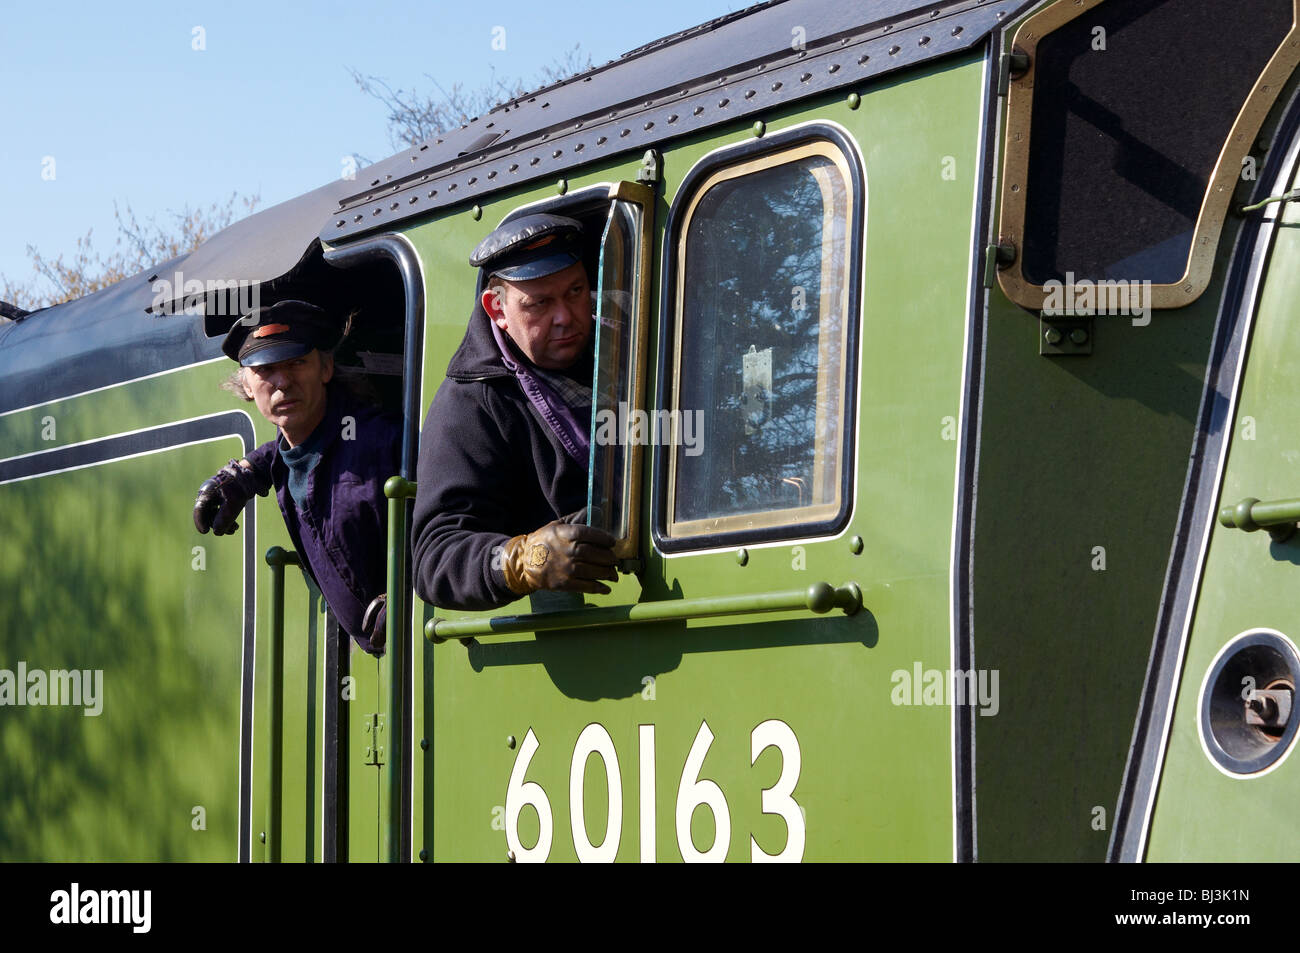 New Peppercorn Class A1 pacific steam loco at Ropley on the Mid-Hants Railway. Stock Photo